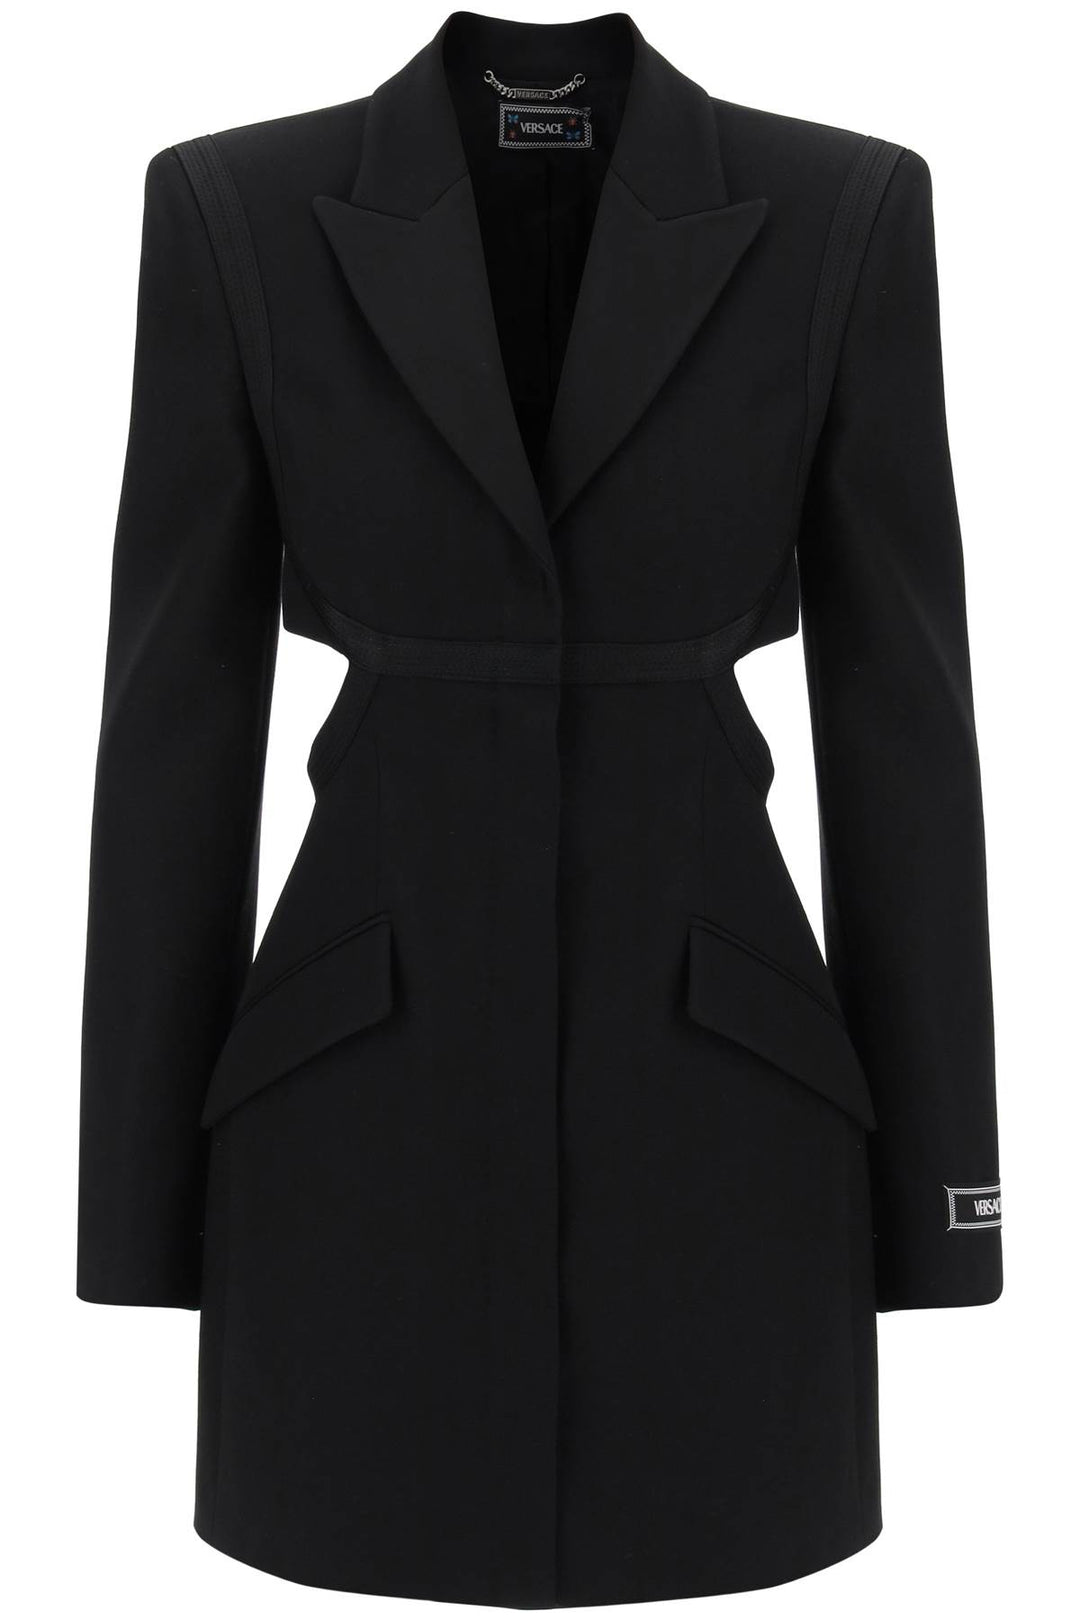 Versace Blazer Dress With Cut Outs   Nero